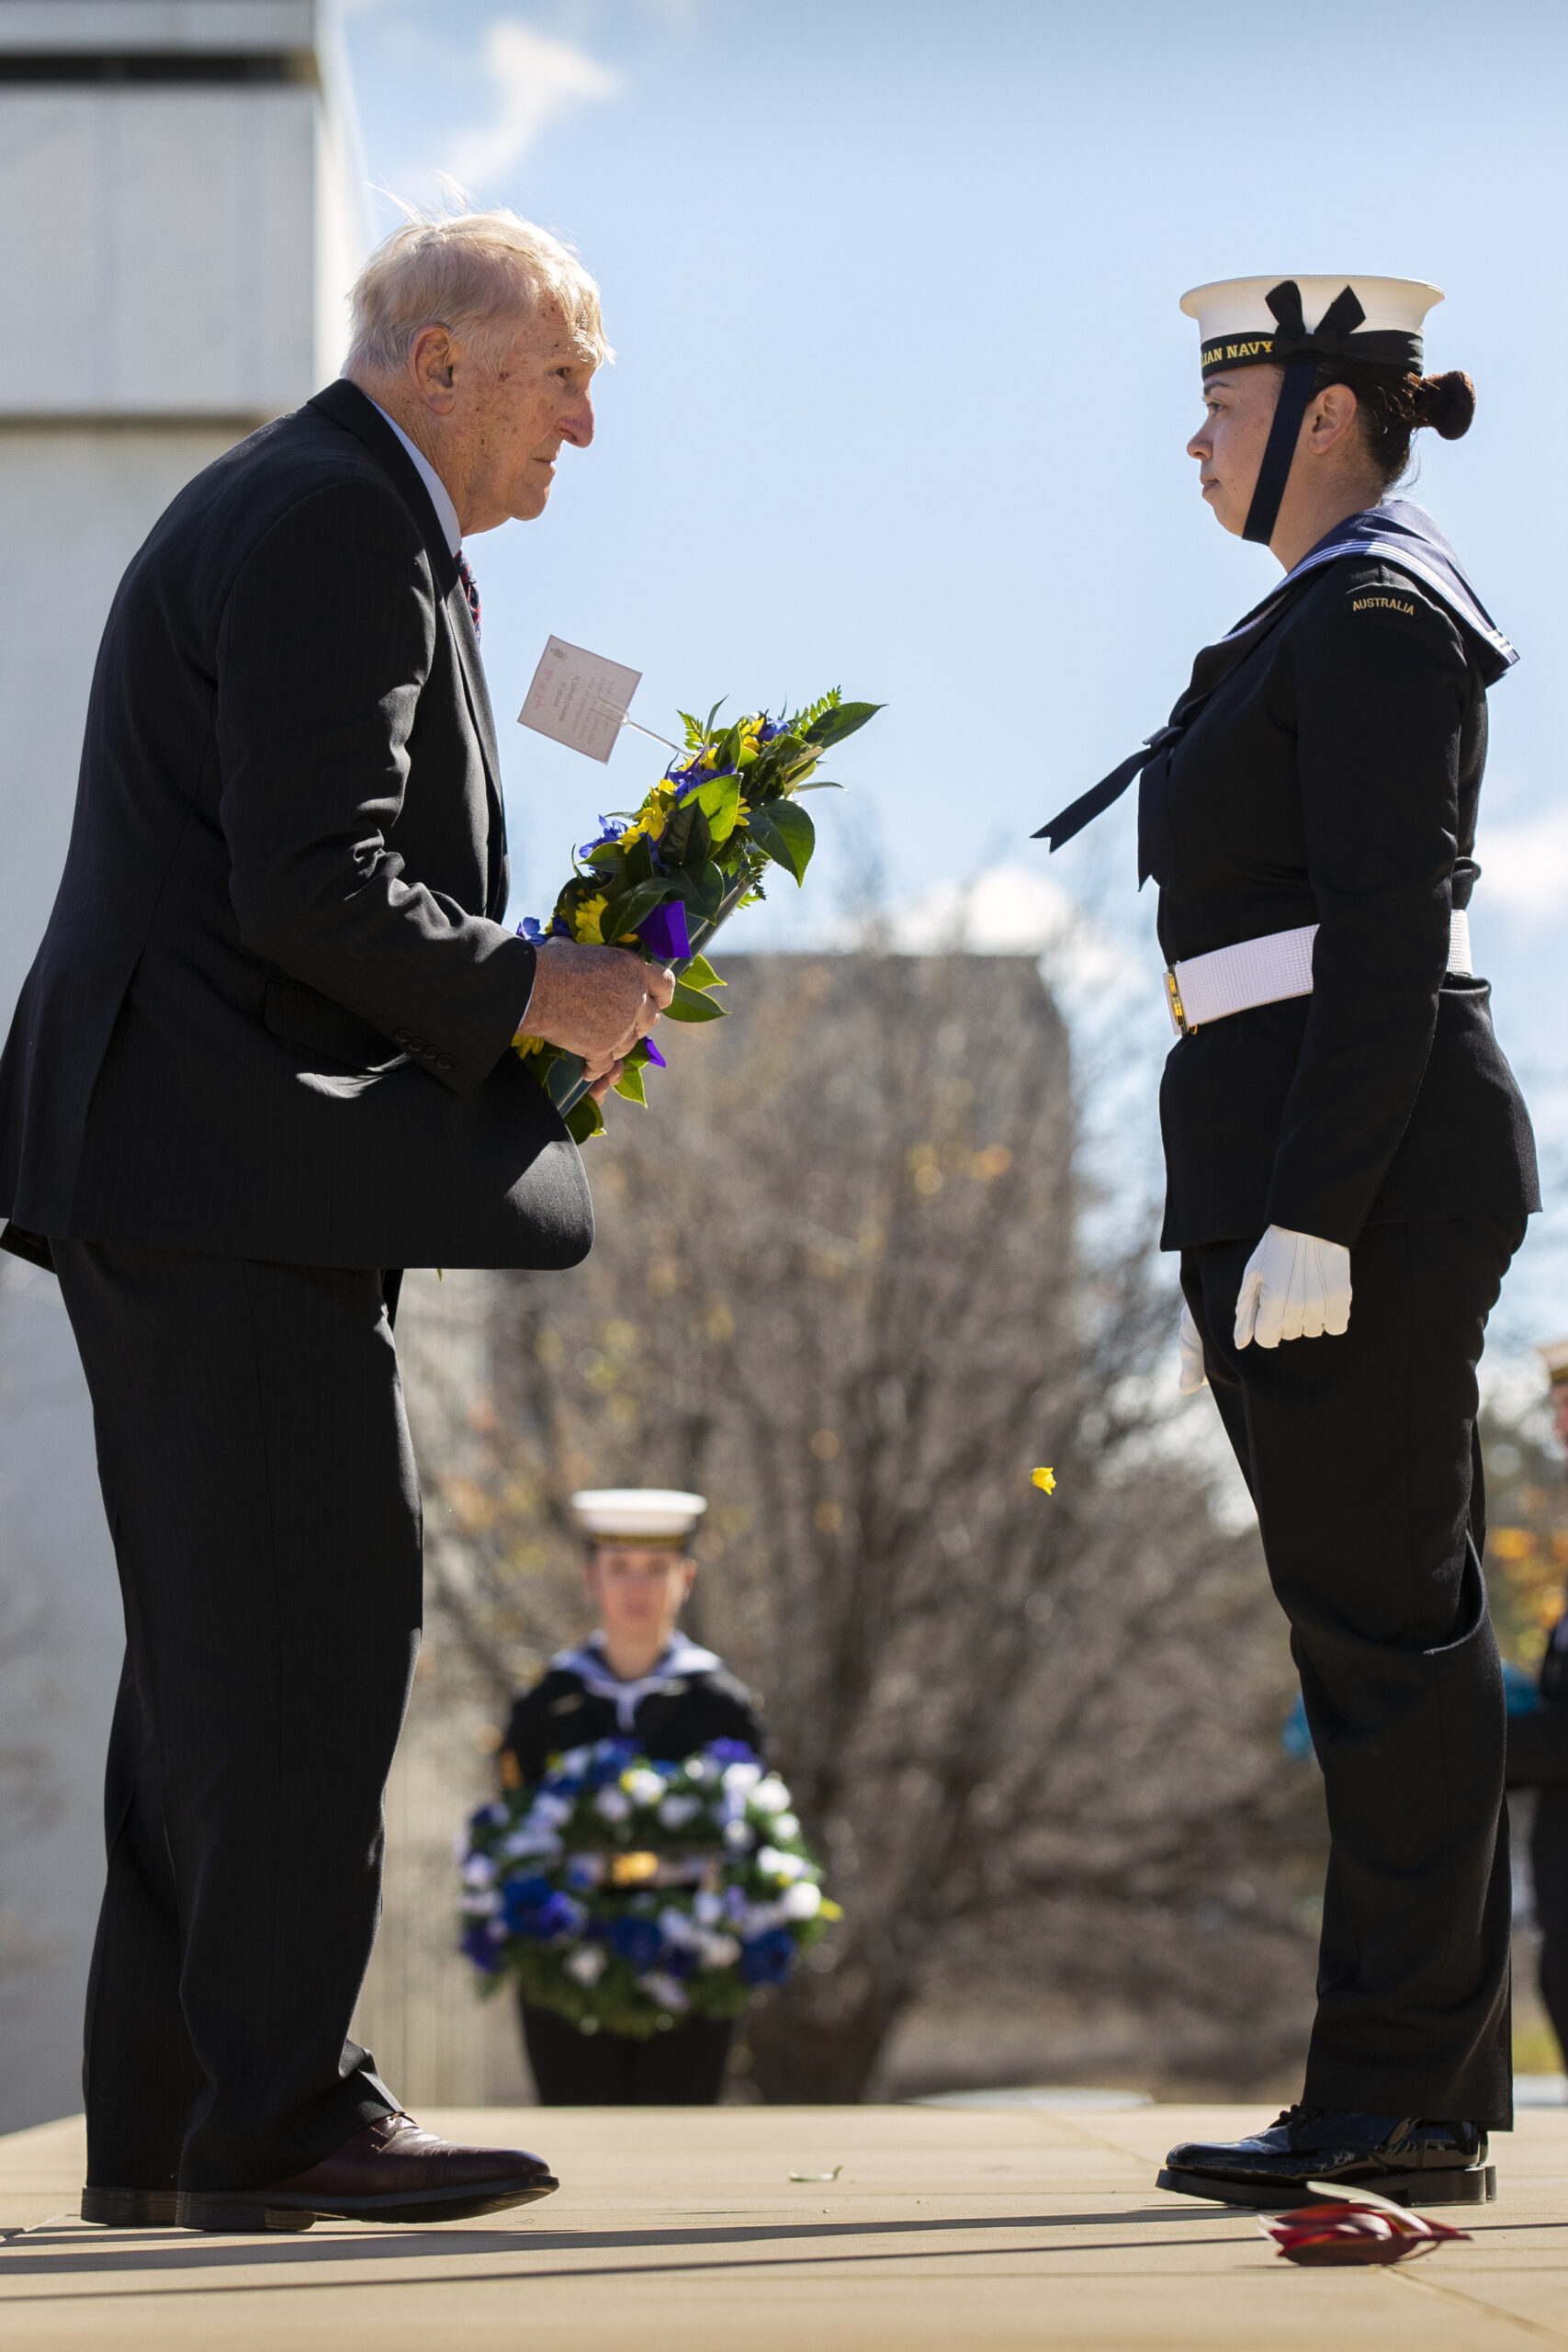 Mr Peter Radtke receives a wreath on behalf of Mr Derek Holyoake during a ceremony to commemorate the 79th anniversary of the Battle of the Coral Sea at Russel Offices, Canberra.  *** Local Caption *** The Minister for Defence Industry the Honourable Melissa Price MP, invited American Japanese and Australian dignitaries and Australian Defence Force personnel to commemorate the 79th anniversary of the Battle of the Coral Sea (4  8 May 1942) at the Australian-American memorial in Field Marshall Sir Thomas Blamey Square, Canberra on Friday the 14th of May 2021. 

The ceremony commemorated a decisive naval battle of the Second World War, where Australian and American naval forces and aircraft halted the advance of the Imperial Japanese Navy and their attempt to capture the then Australian protectorate of Papua. 

The battle was the first naval action between aircraft carriers, with the USS Lexington and USS Yorktown supported by Australian and American cruisers: HMAS Australia, HMAS Hobart and USS Chicago.